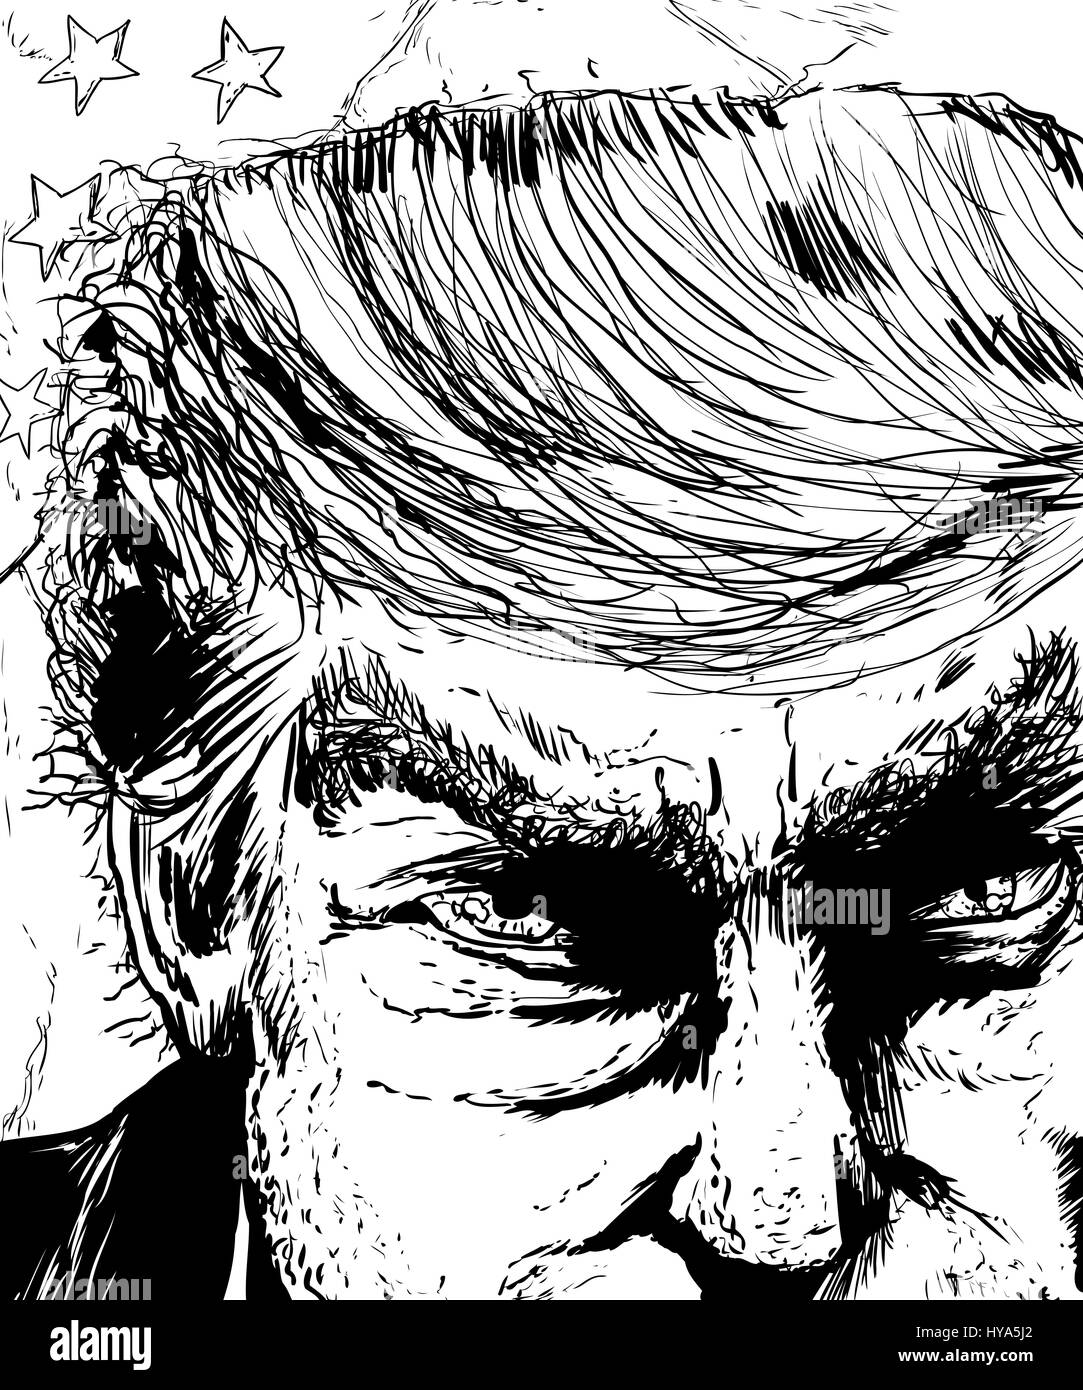 April 1, 2017. Outlined close up sketch on face of Donald Trump scowling Stock Photo